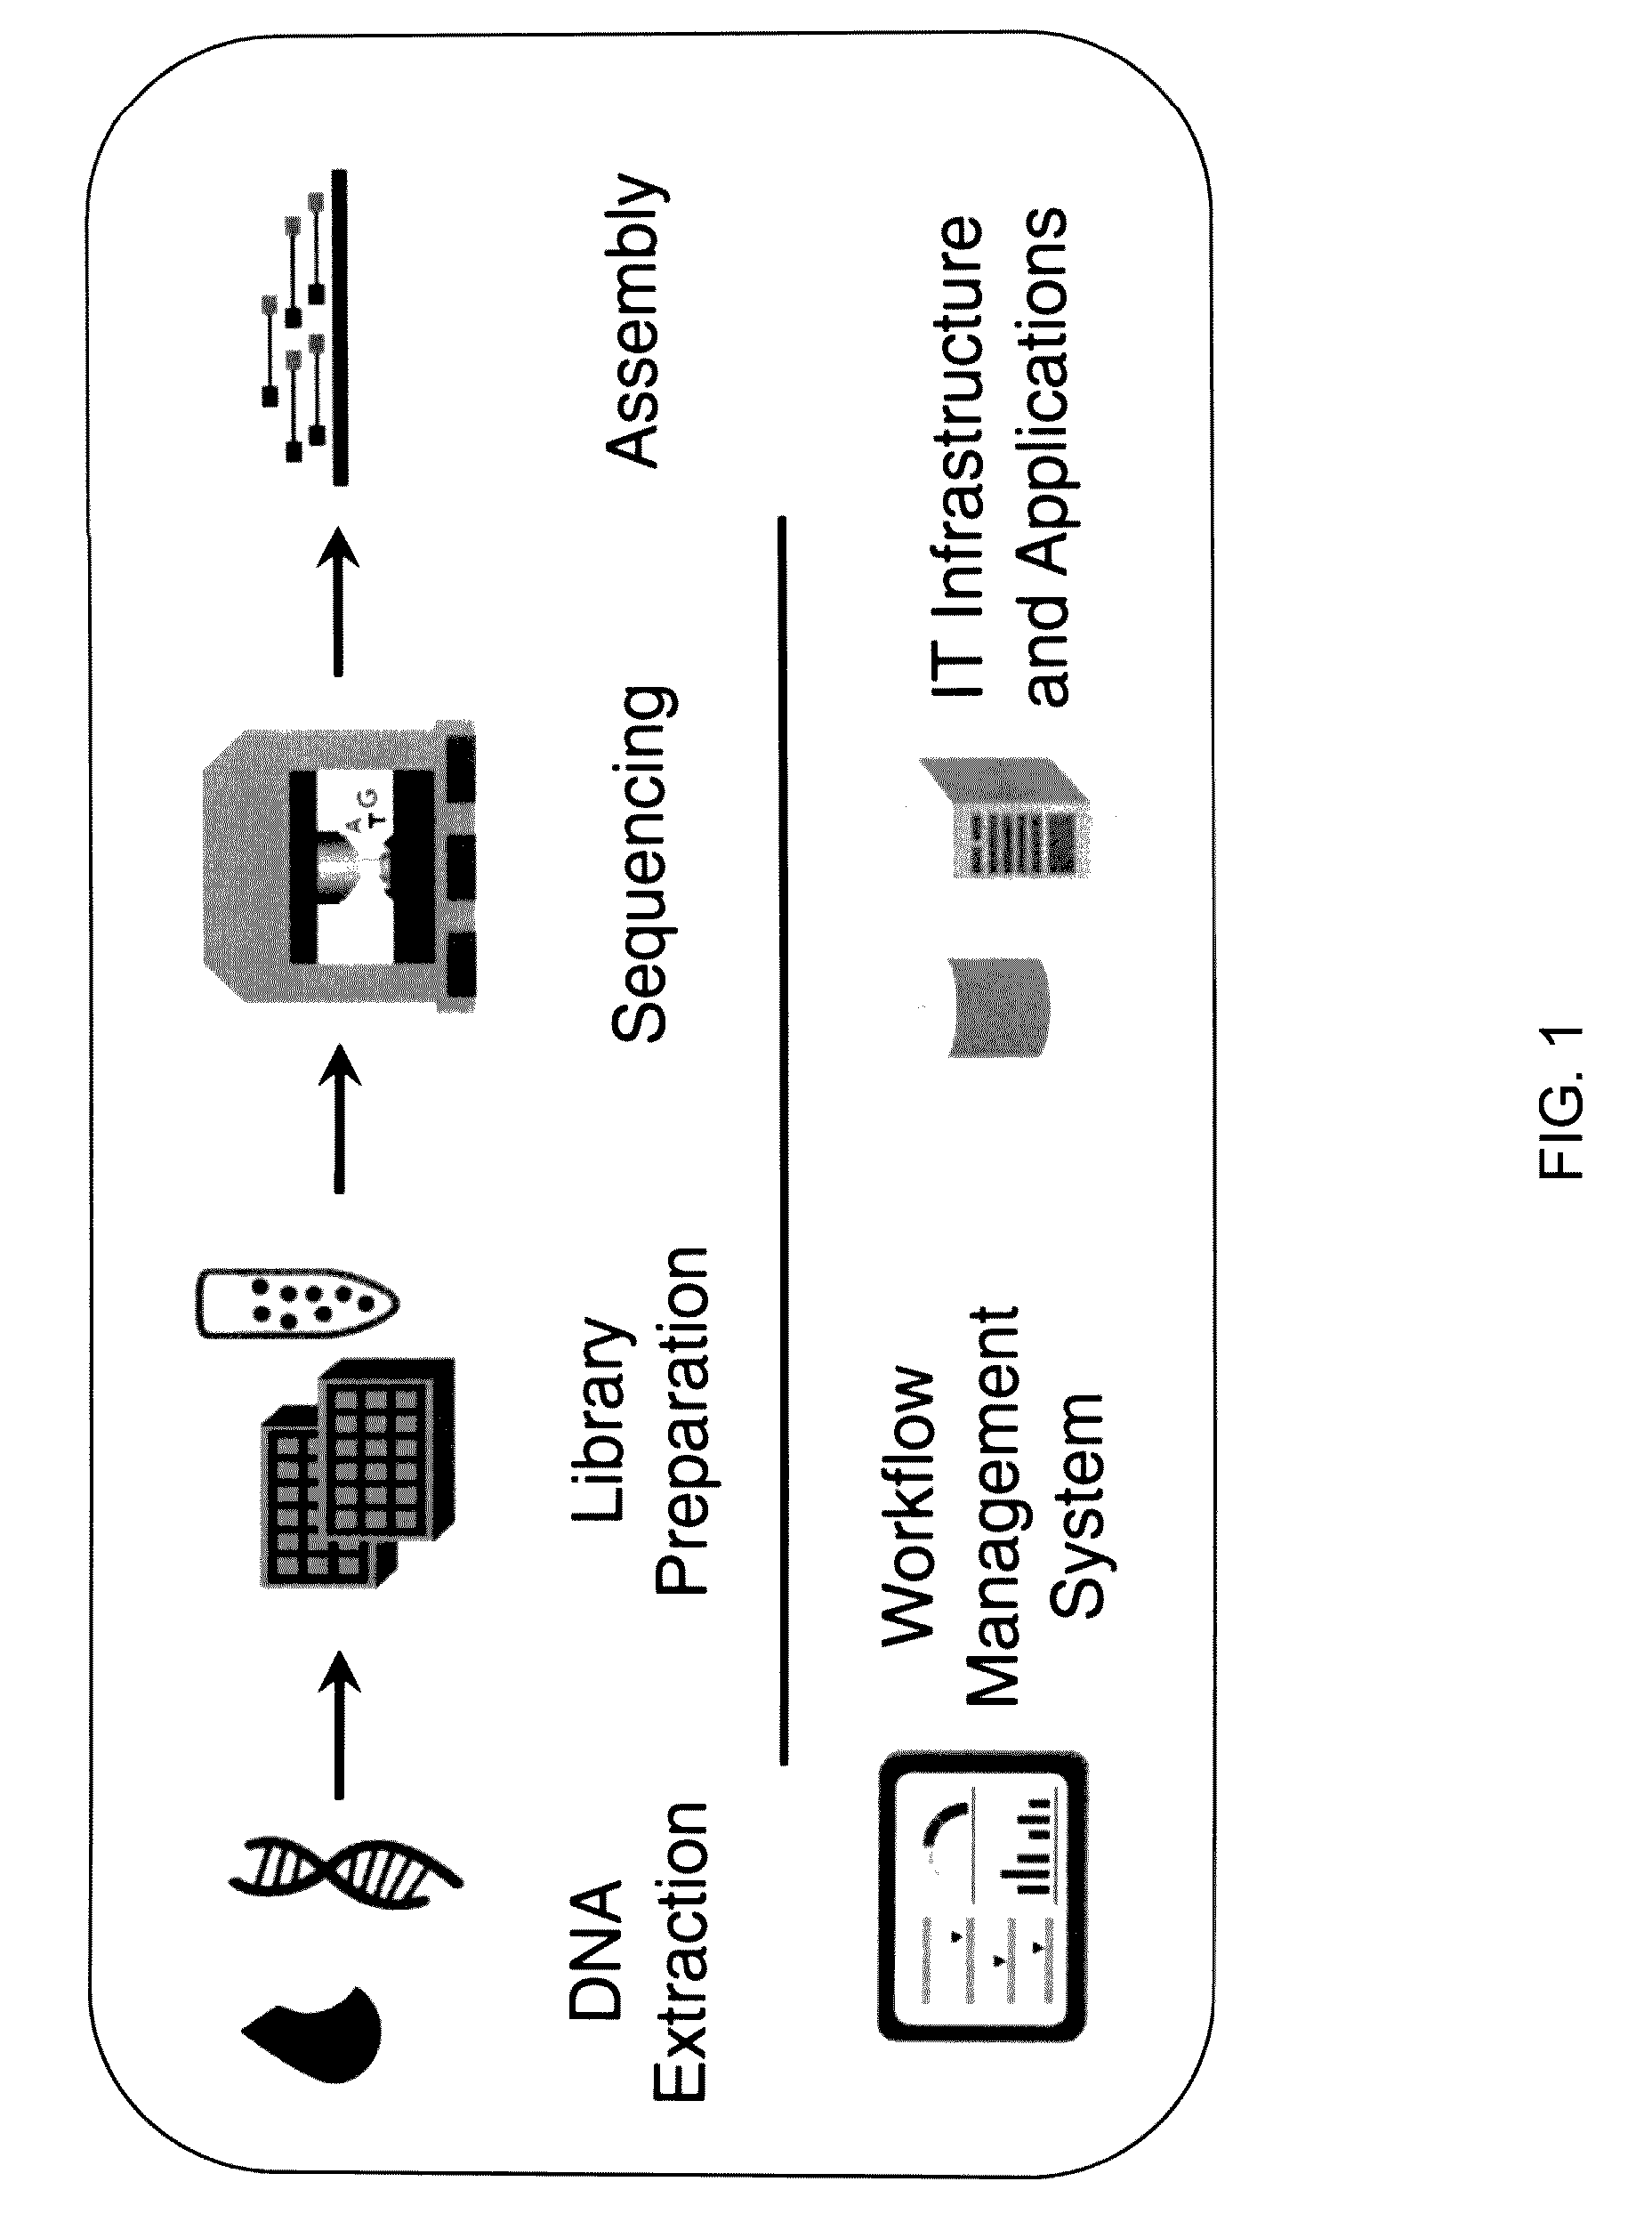 Integrated system for nucleic acid sequence and analysis